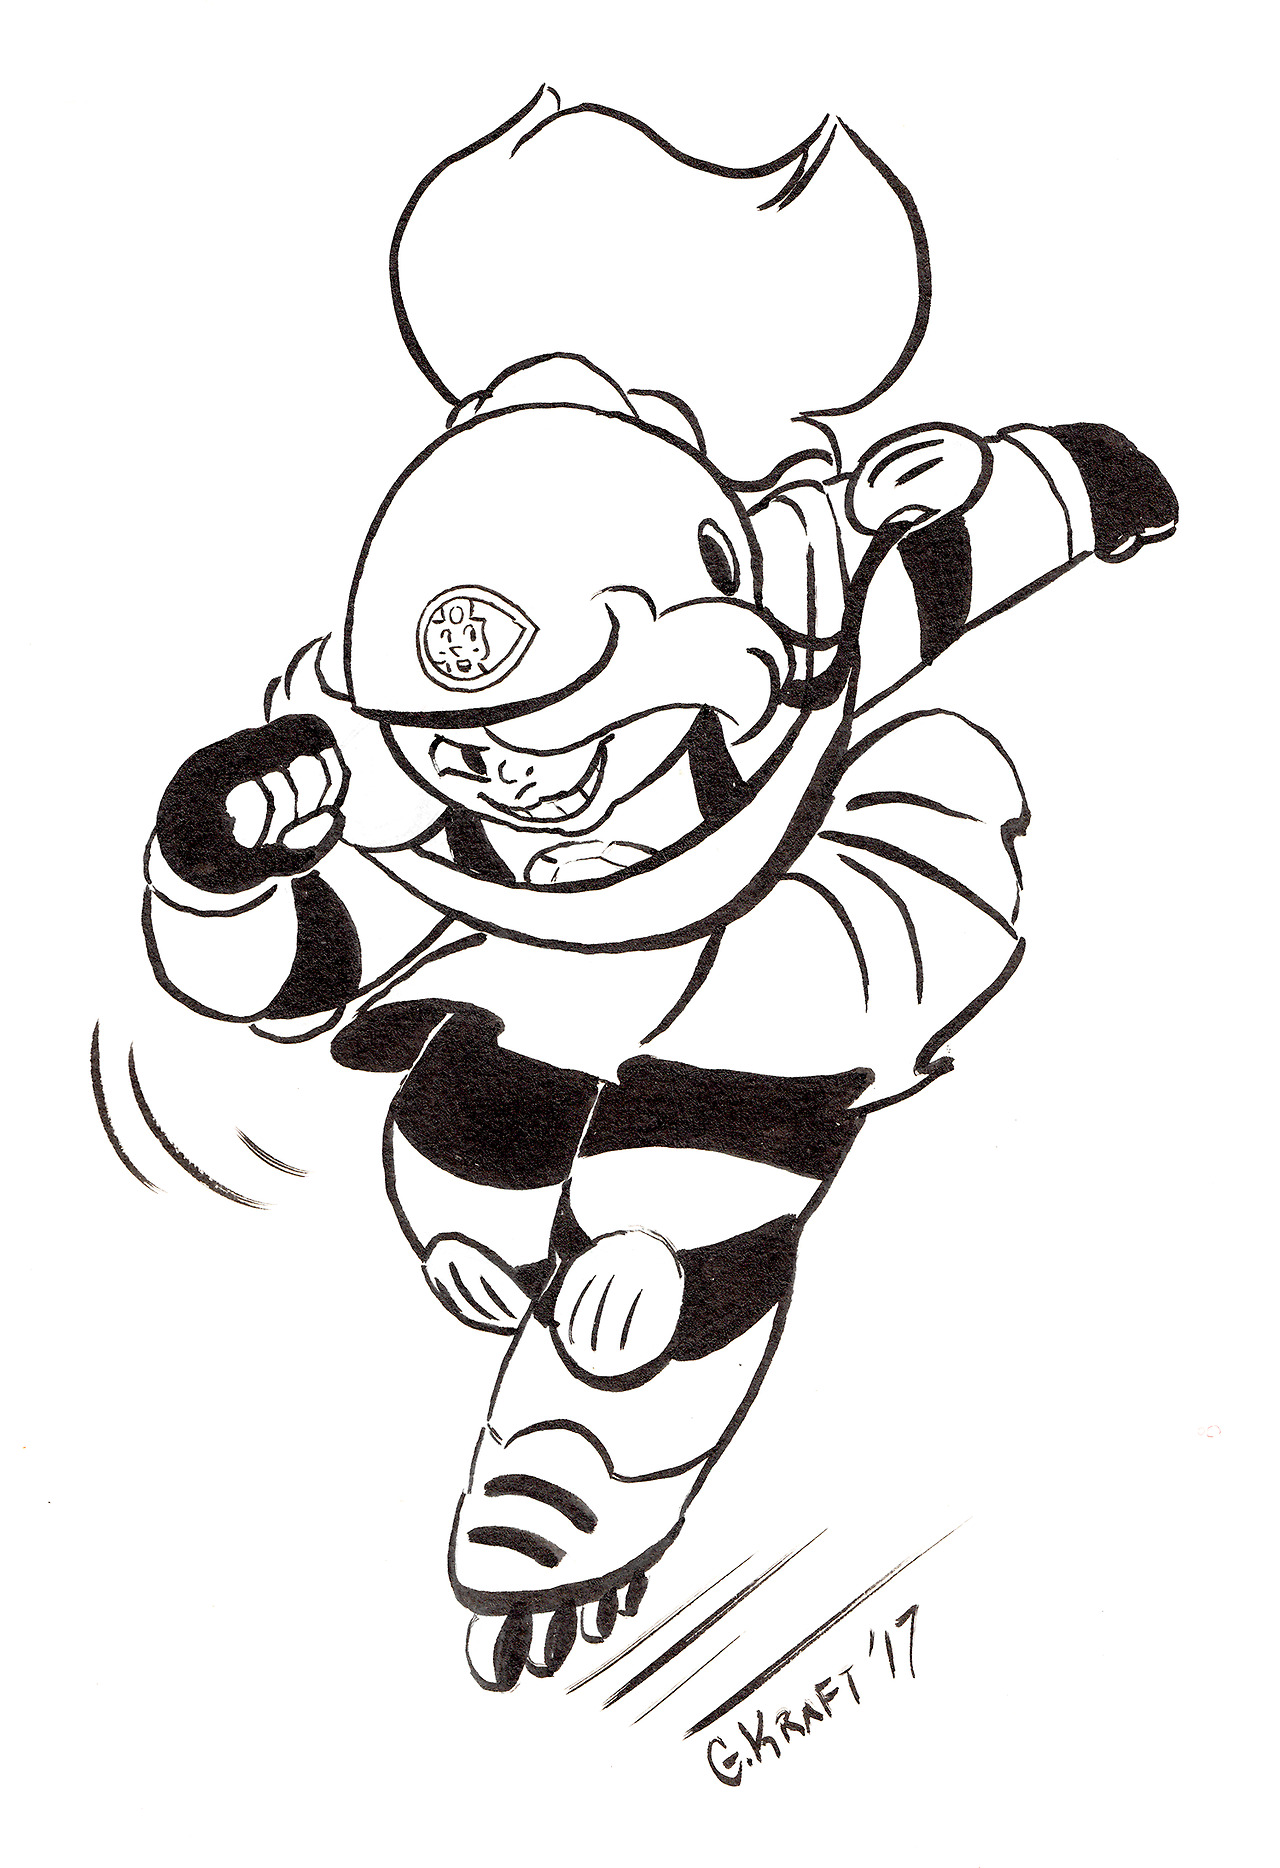 A roller derby Amethyst done as a little gift/trade for LittleUrsaCosplay who helped me procure some SU goodies!

 Amethyst gets a Pearl Point for being safe and wearing a helmet (even though she unfastened the strap).